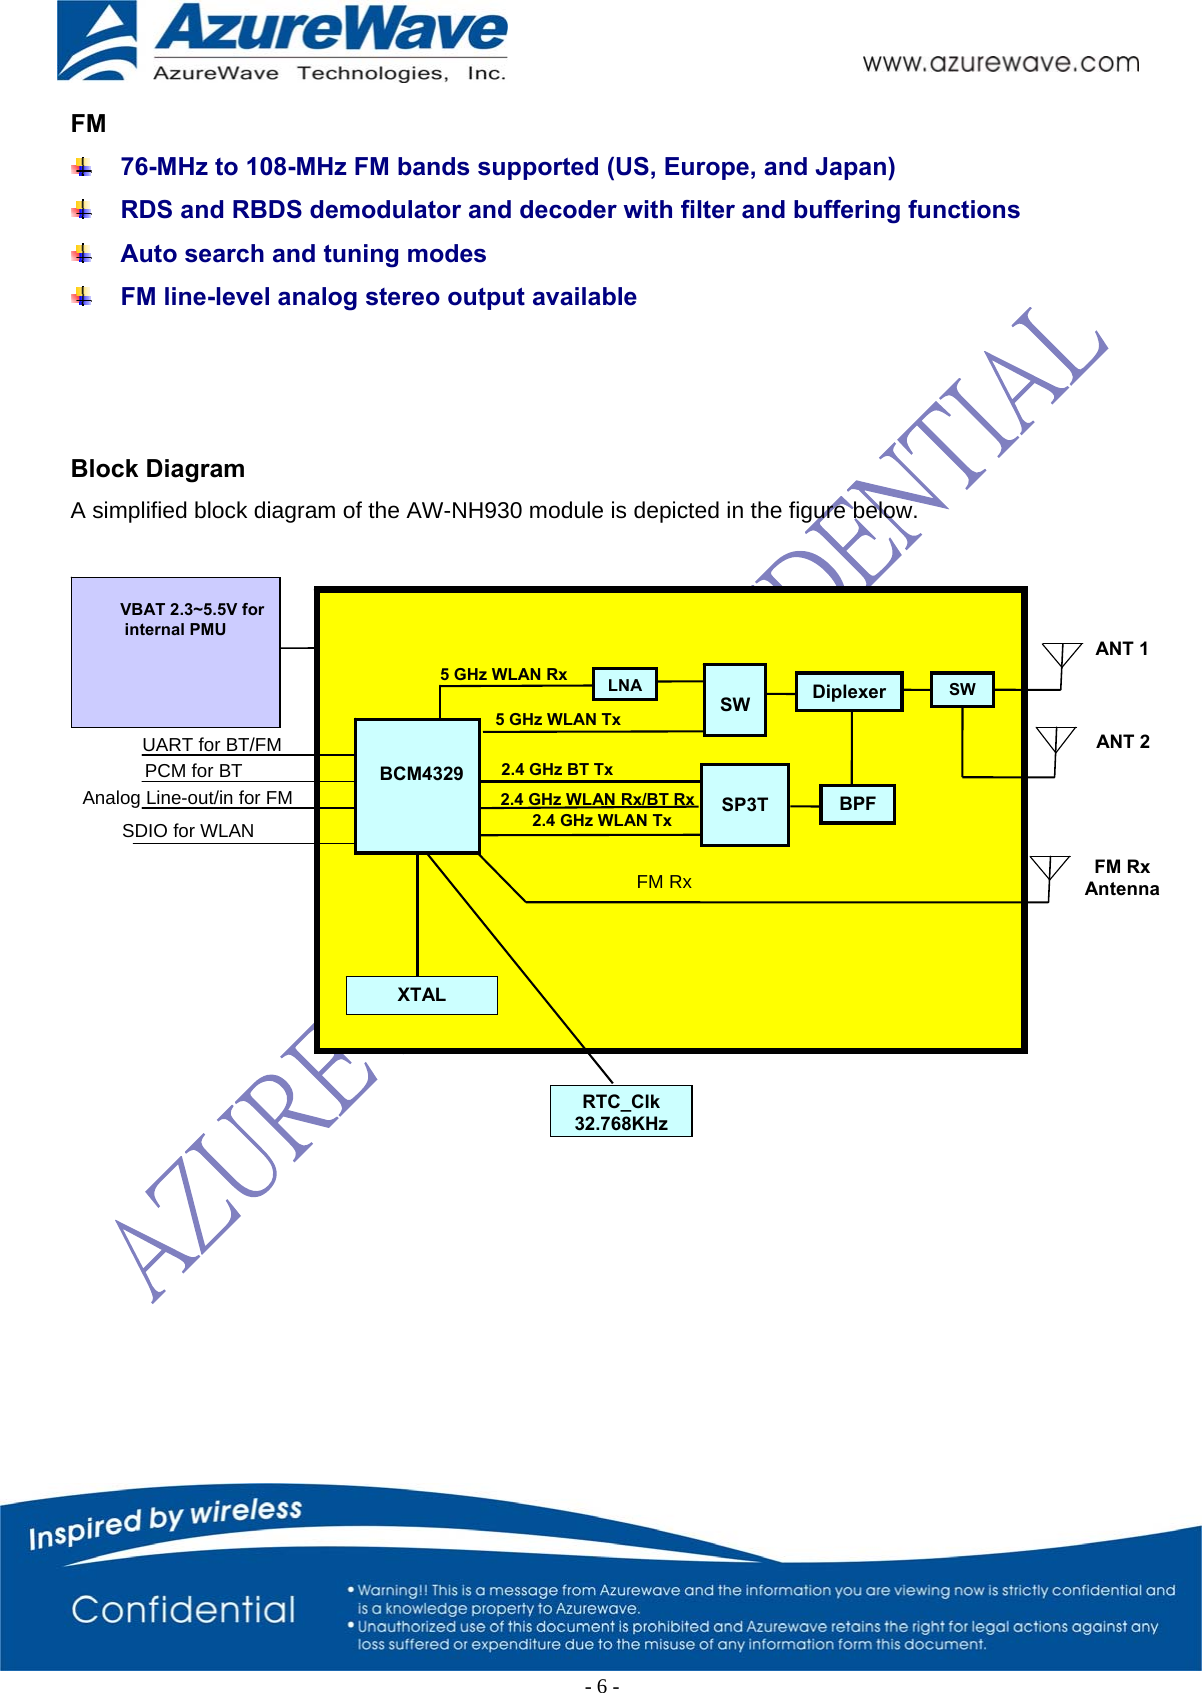  FM  76-MHz to 108-MHz FM bands supported (US, Europe, and Japan)  RDS and RBDS demodulator and decoder with filter and buffering functions  Auto search and tuning modes  FM line-level analog stereo output available    Block Diagram A simplified block diagram of the AW-NH930 module is depicted in the figure below.   VBAT 2.3~5.5V for internal PMU ANT 1          BCM4329 SP3T BPF 2.4 GHz WLAN Rx/BT Rx 2.4 GHz BT Tx XTAL FM Rx AntennaFM RxRTC_Clk32.768KHz2.4 GHz WLAN TxUART for BT/FM SDIO for WLAN PCM for BT Analog Line-out/in for FM  5 GHz WLAN Tx5 GHz WLAN Rx SWLNADiplexer SW ANT 2-6-